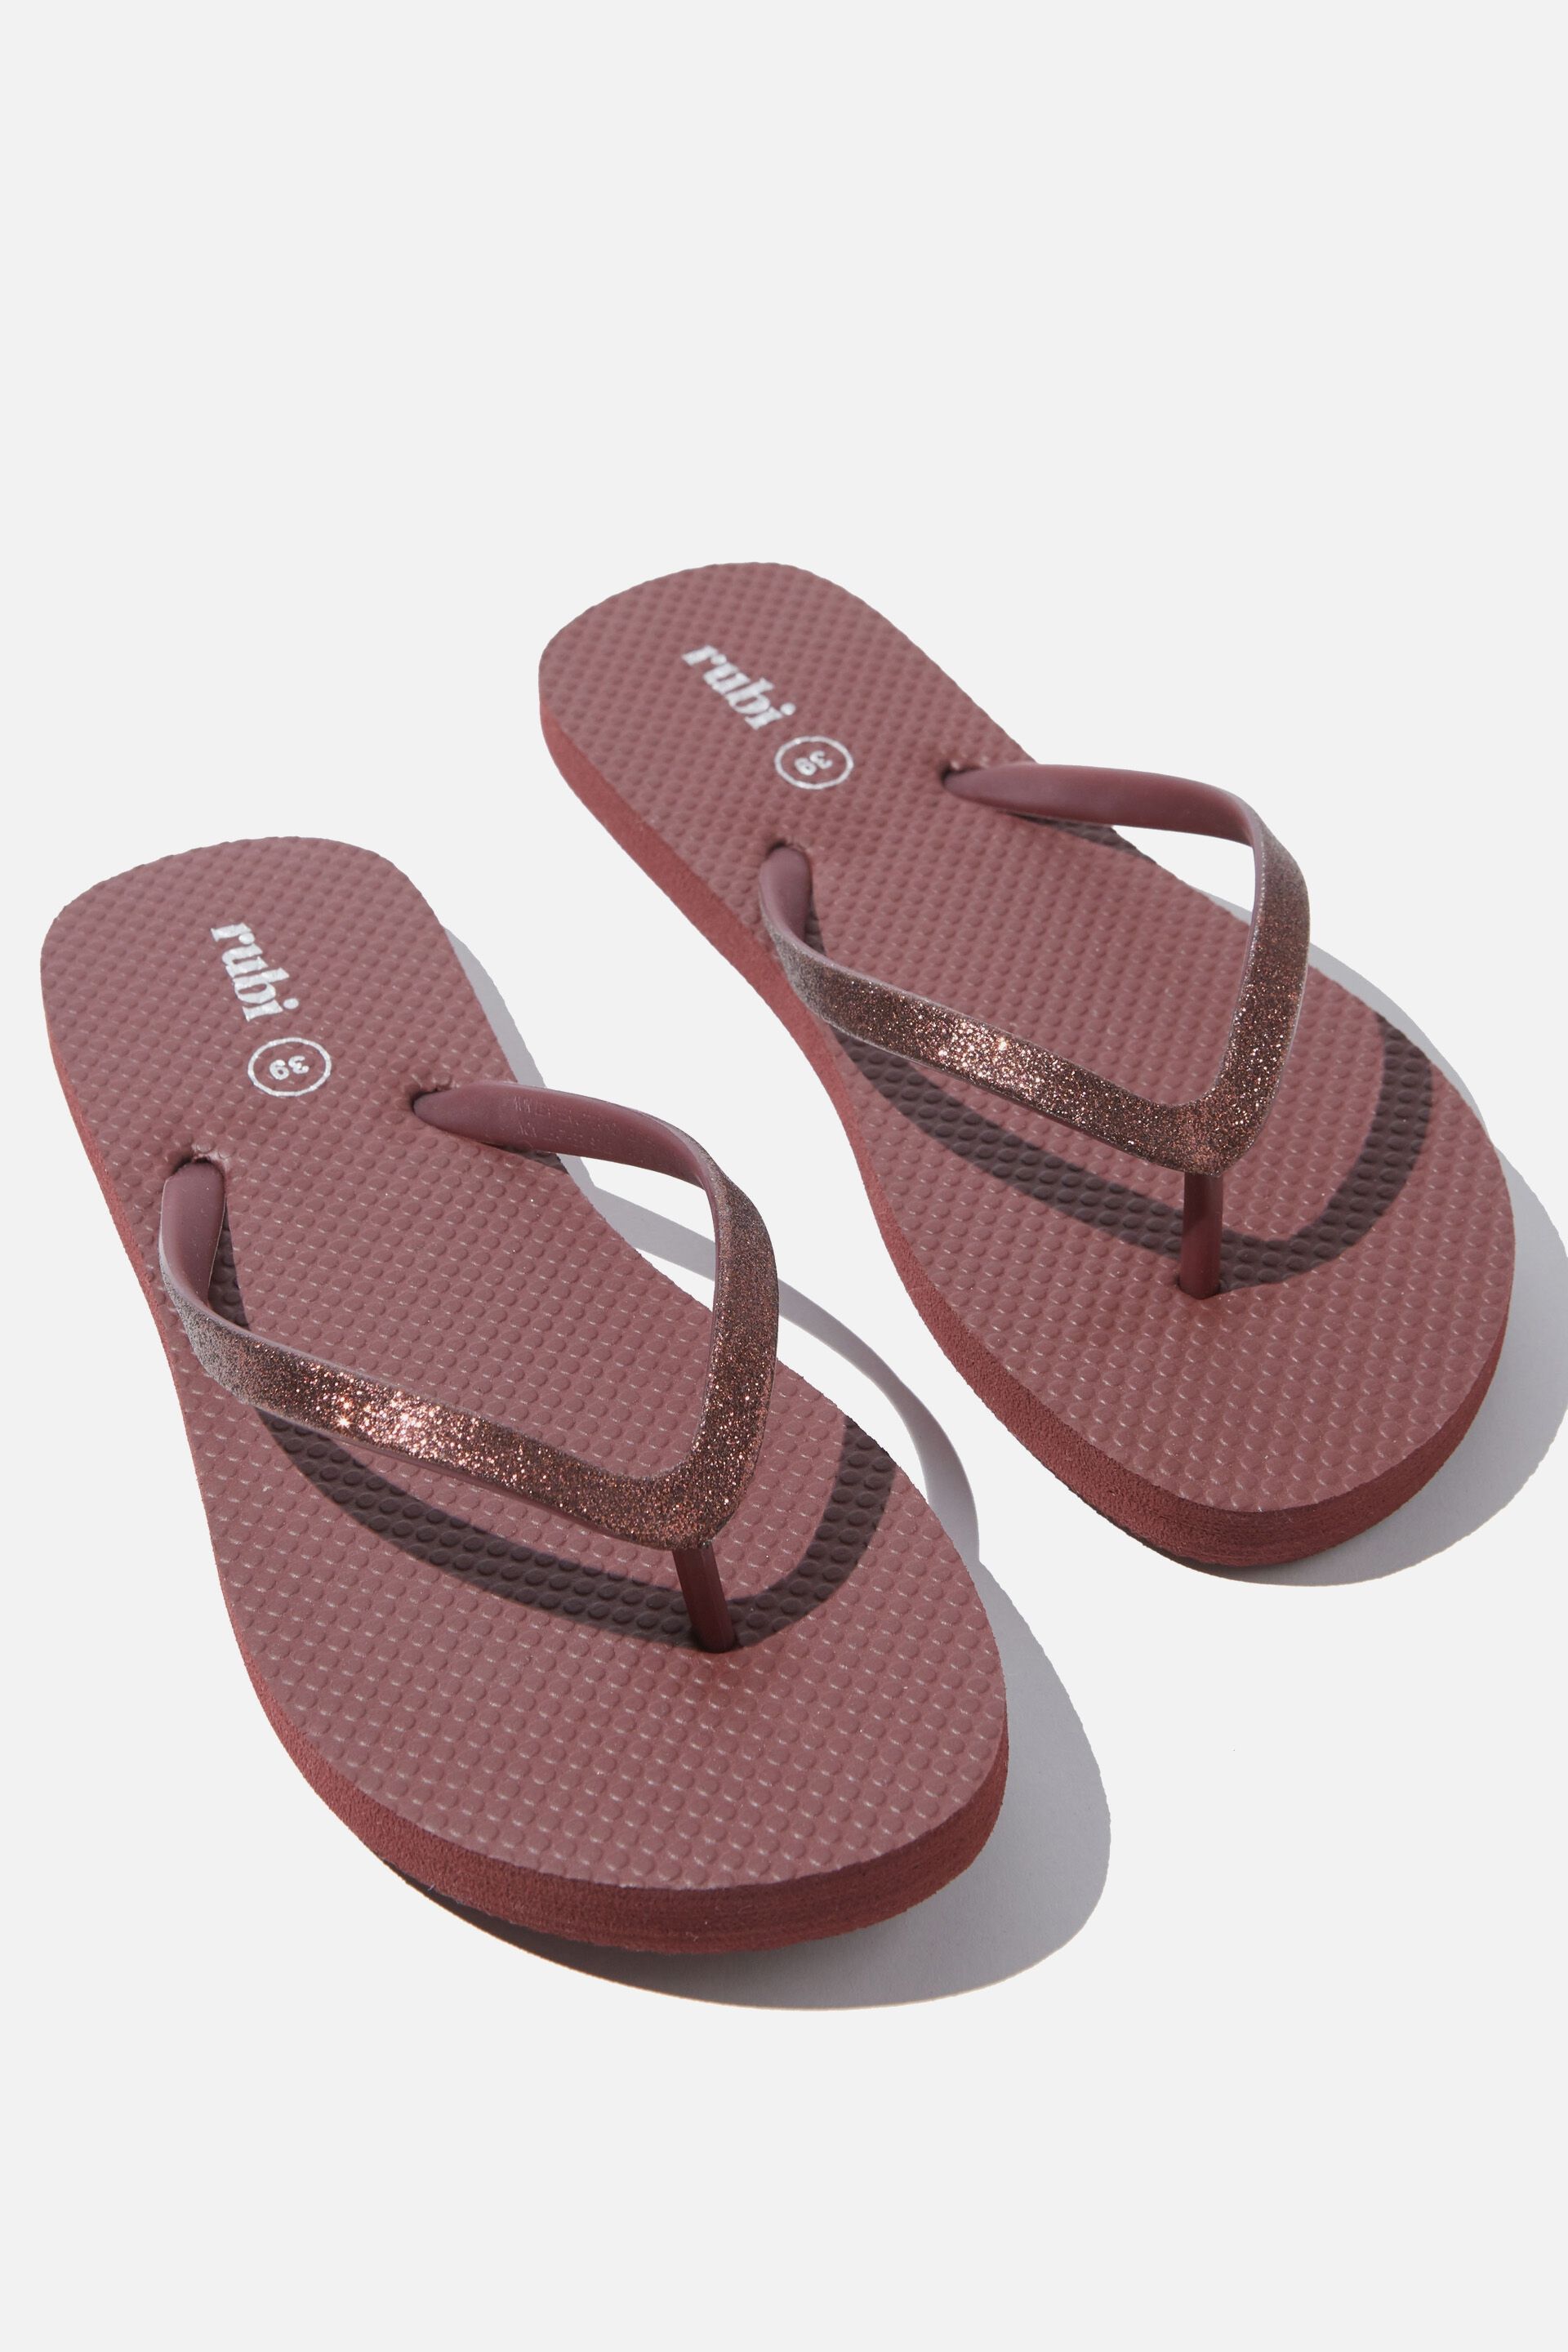 gents chappal online shopping